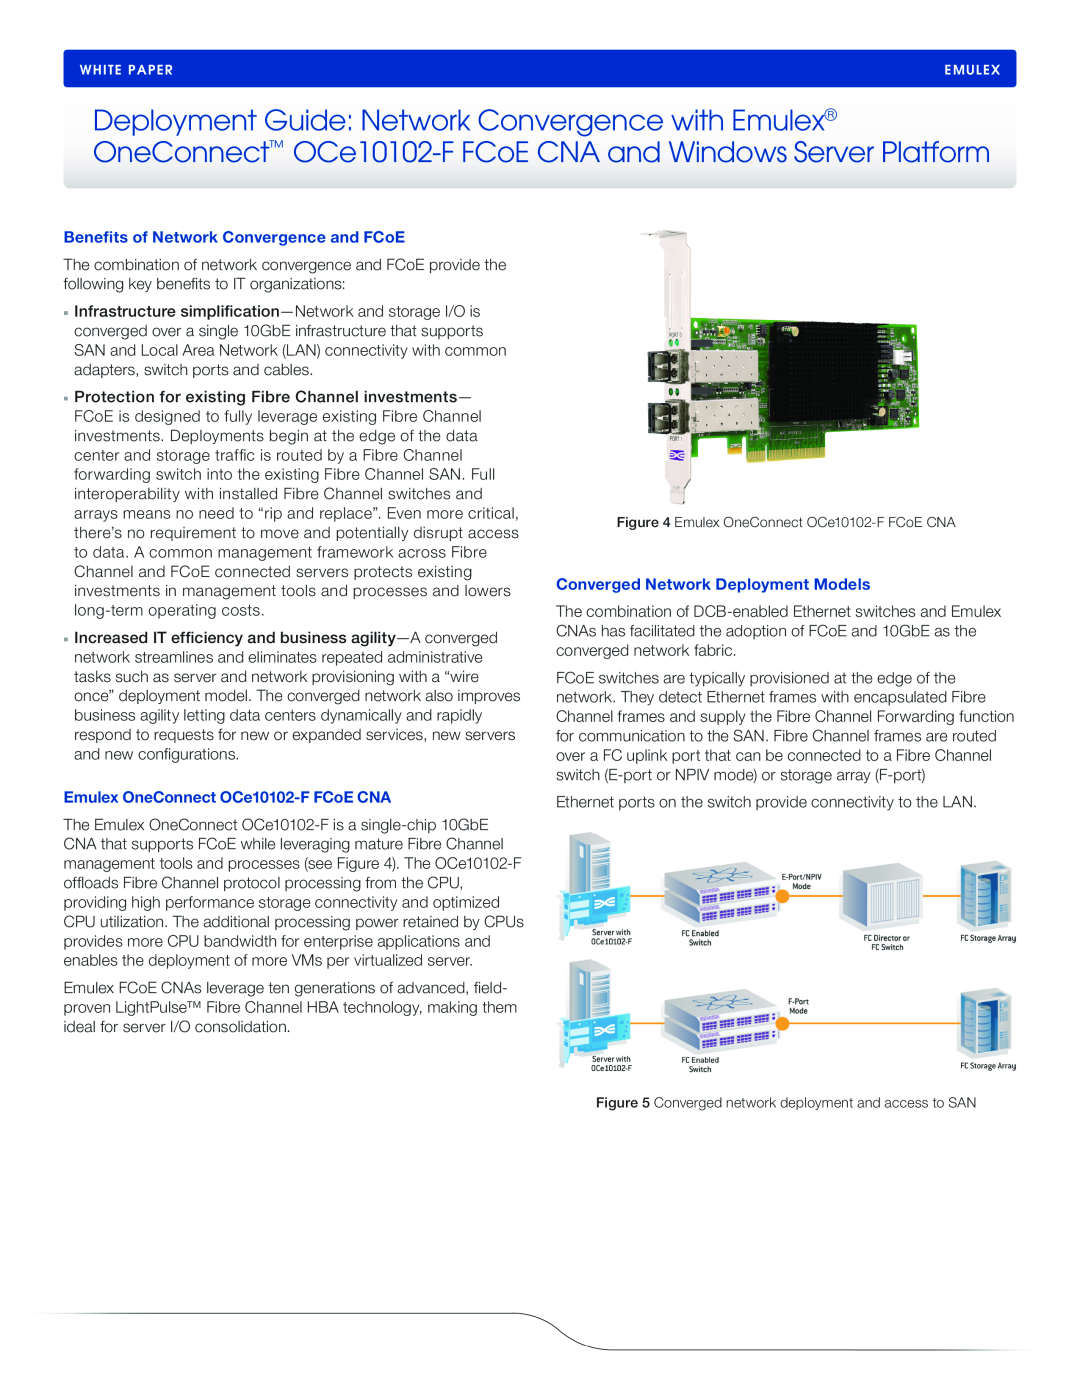 Emulex OCE10102-F manual Benefits of Network Convergence and FCoE, Emulex OneConnect OCe10102-F FCoE CNA 